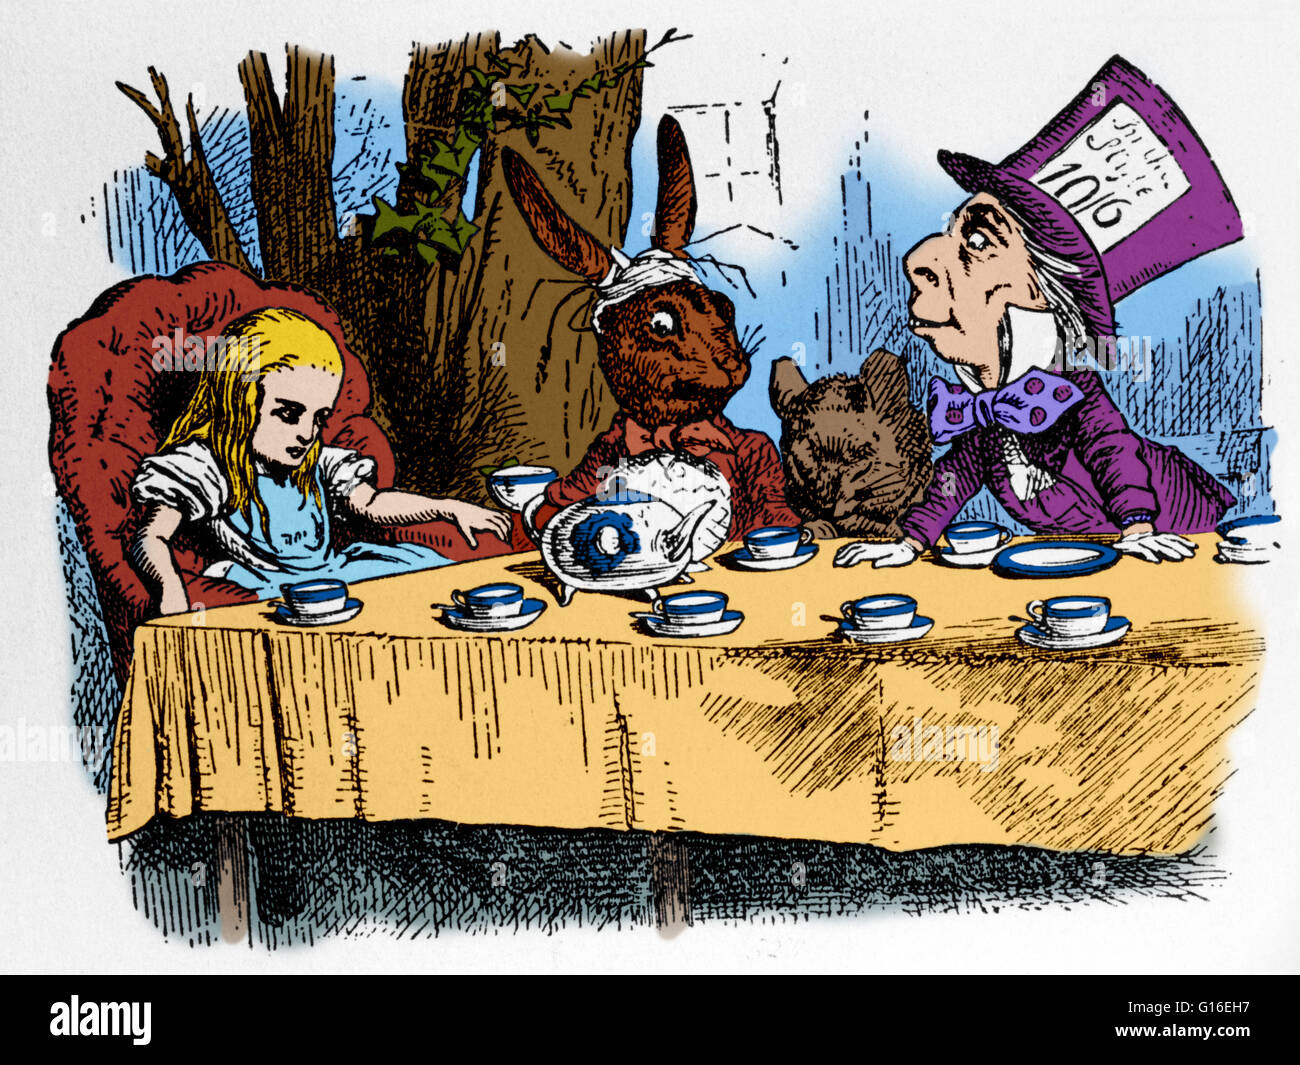 The Mad Hatter's Tea Party, a scene from Lewis Carroll's Alice in Wonderland, illustrated by Sir John Tenniel. This image has been color enhanced. Stock Photo